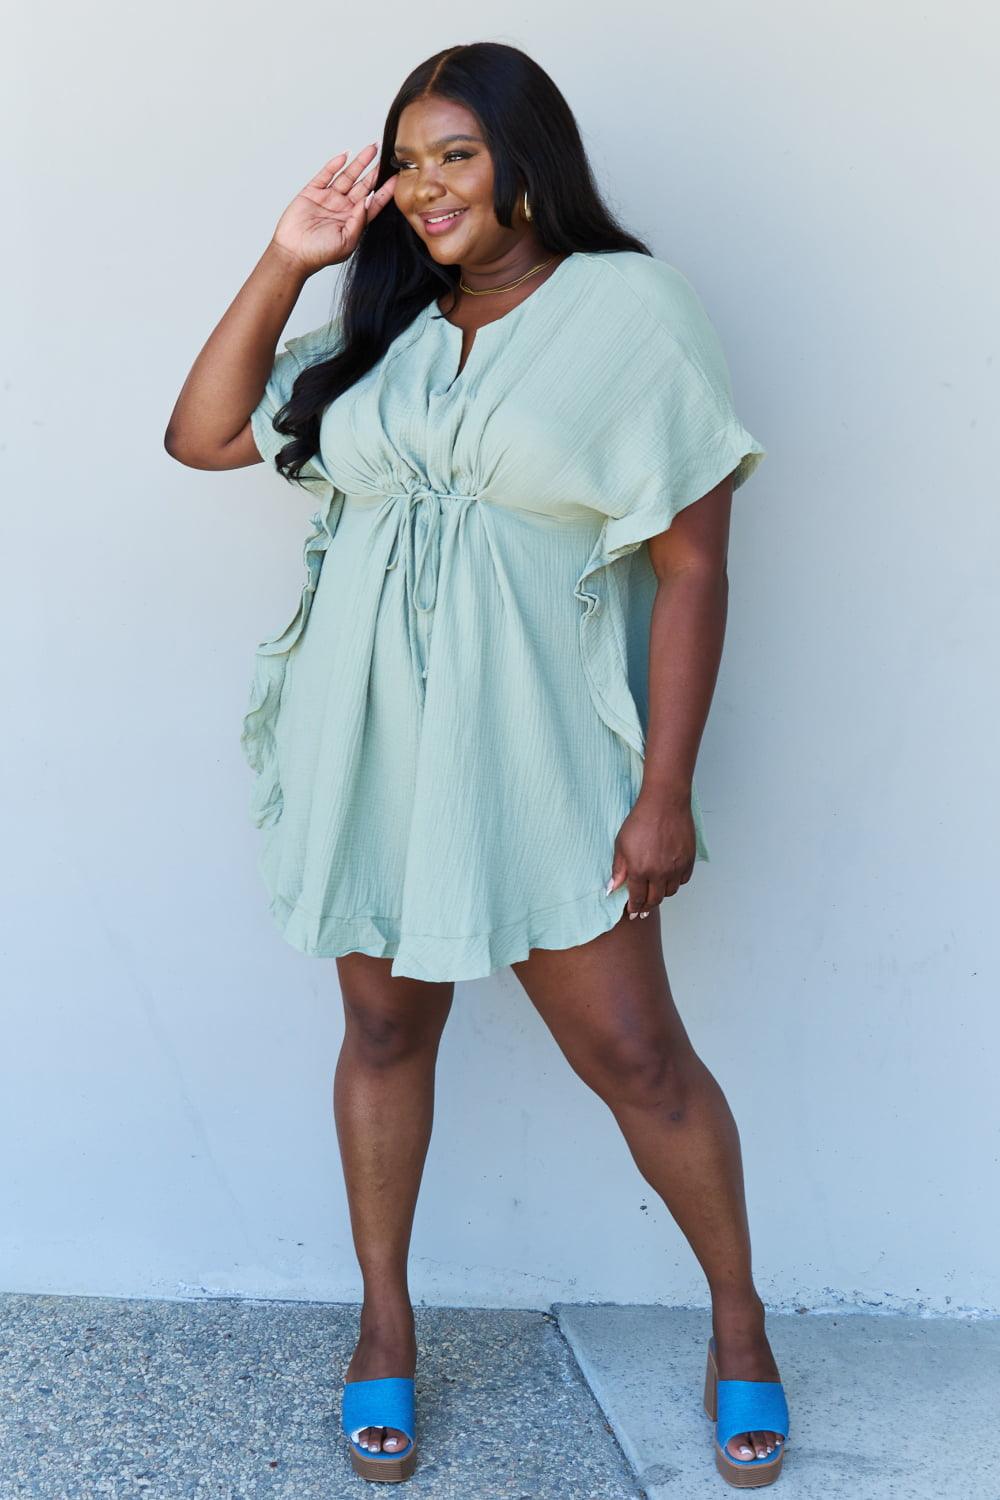 Ninexis Out Of Time Full Size Ruffle Hem Dress with Drawstring Waistband in Light Sage - Anchored Feather Boutique